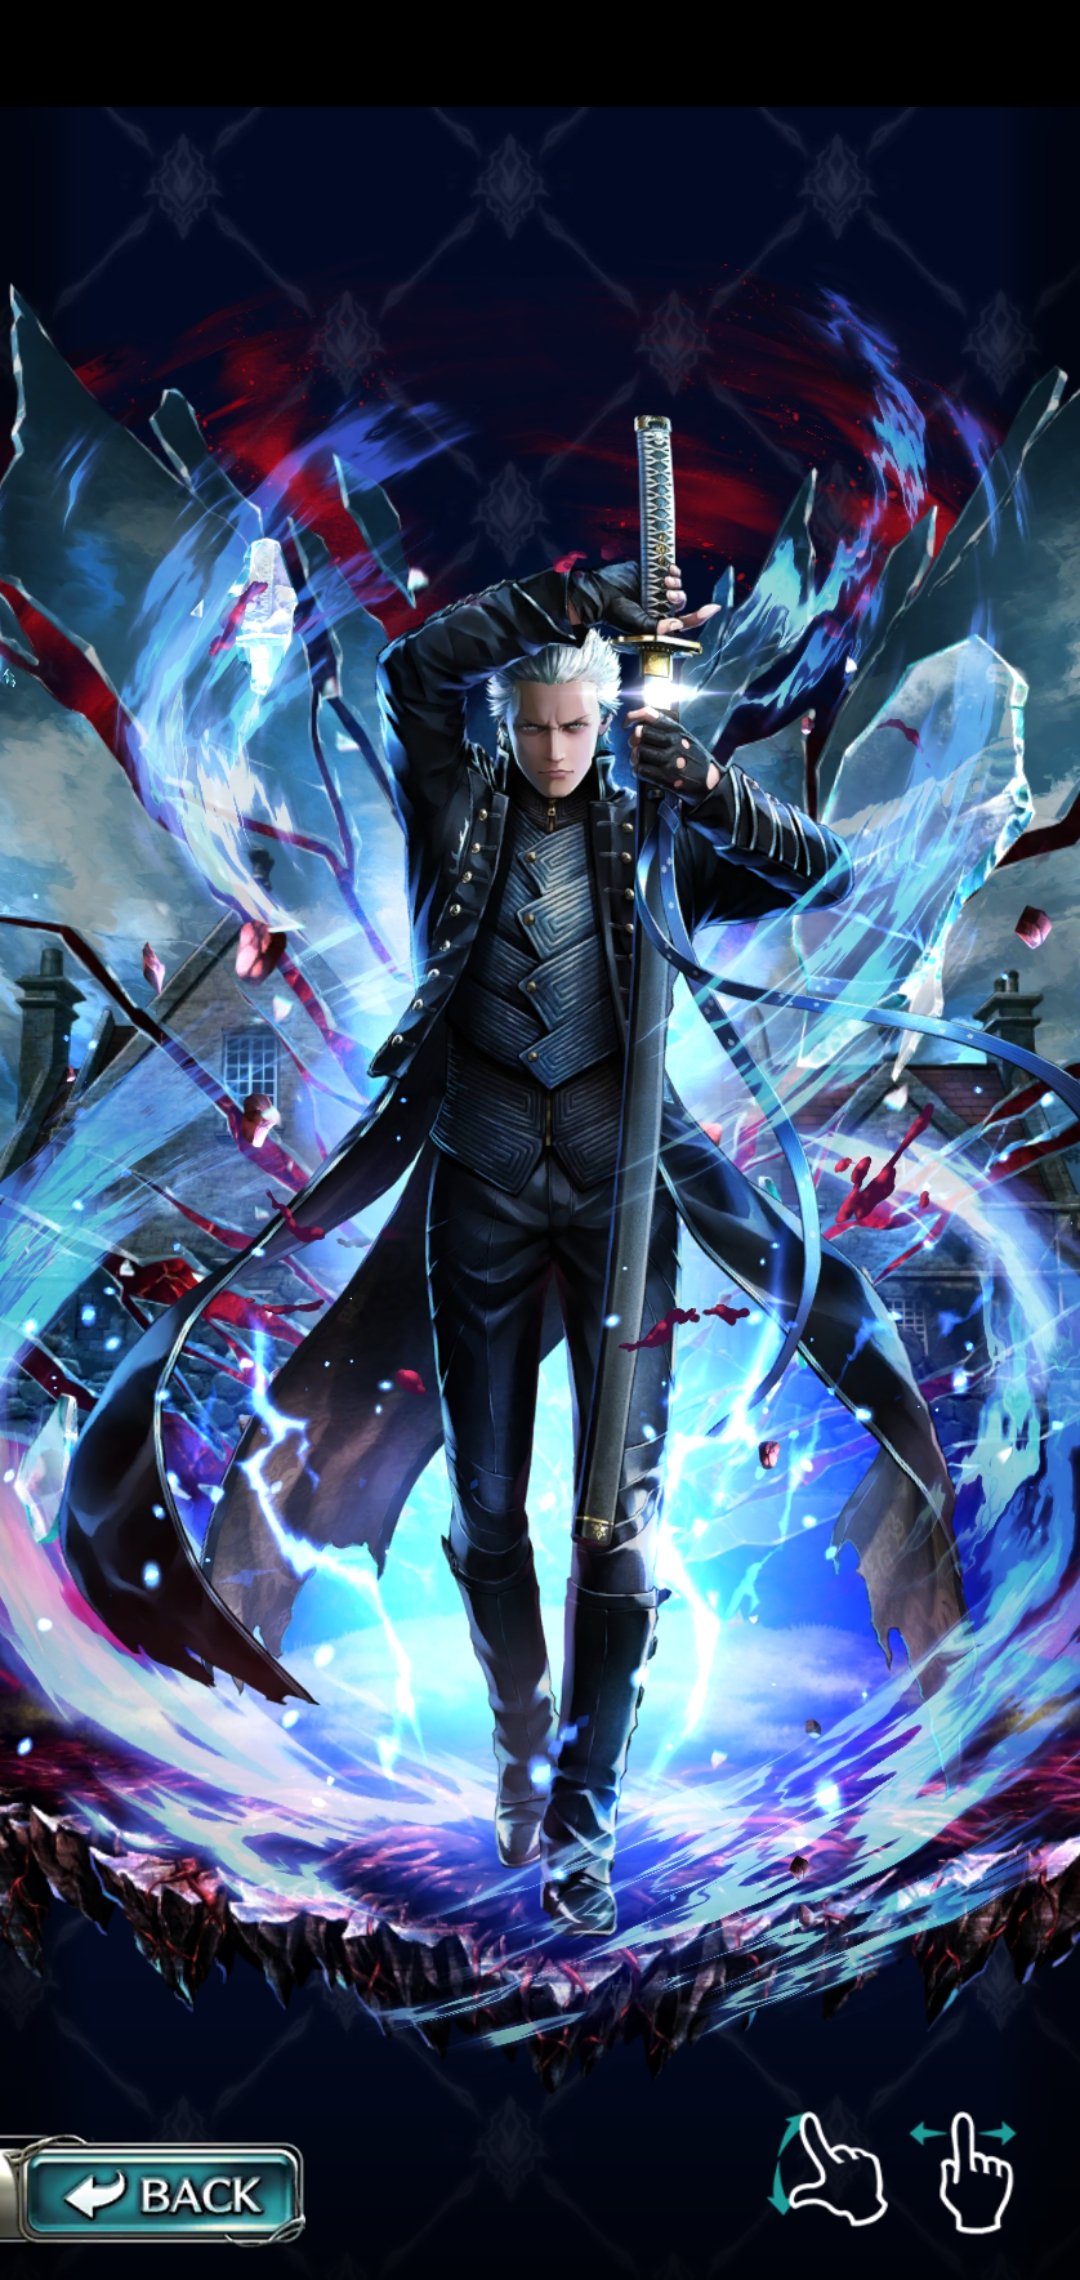 Last Cloudia x Devil May Cry Series Collab Returns With Vergil